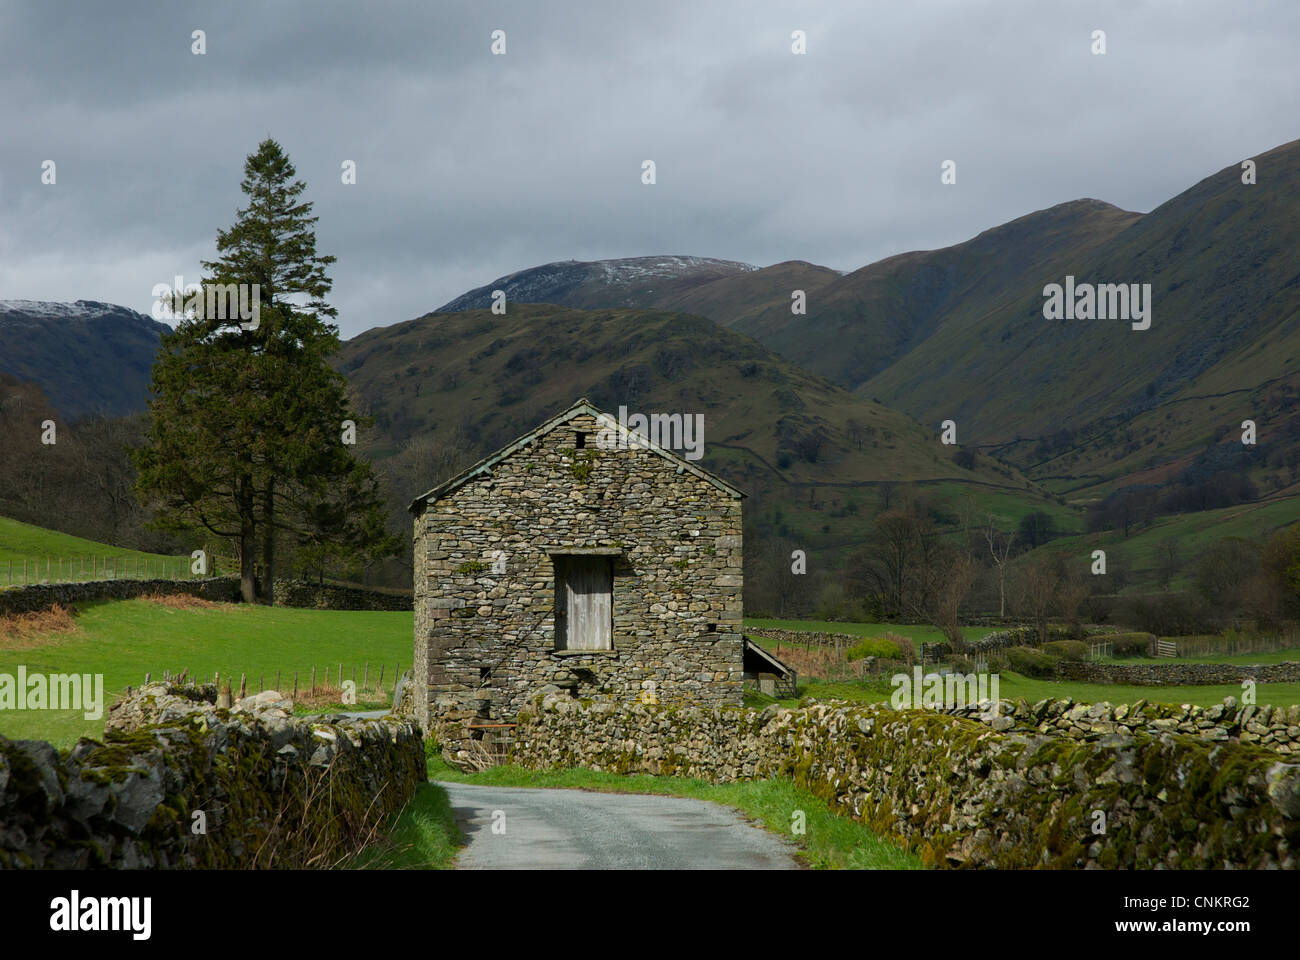 Barn near the village of Troutbeck, Lake District National Park, Cumbria, England UK Stock Photo